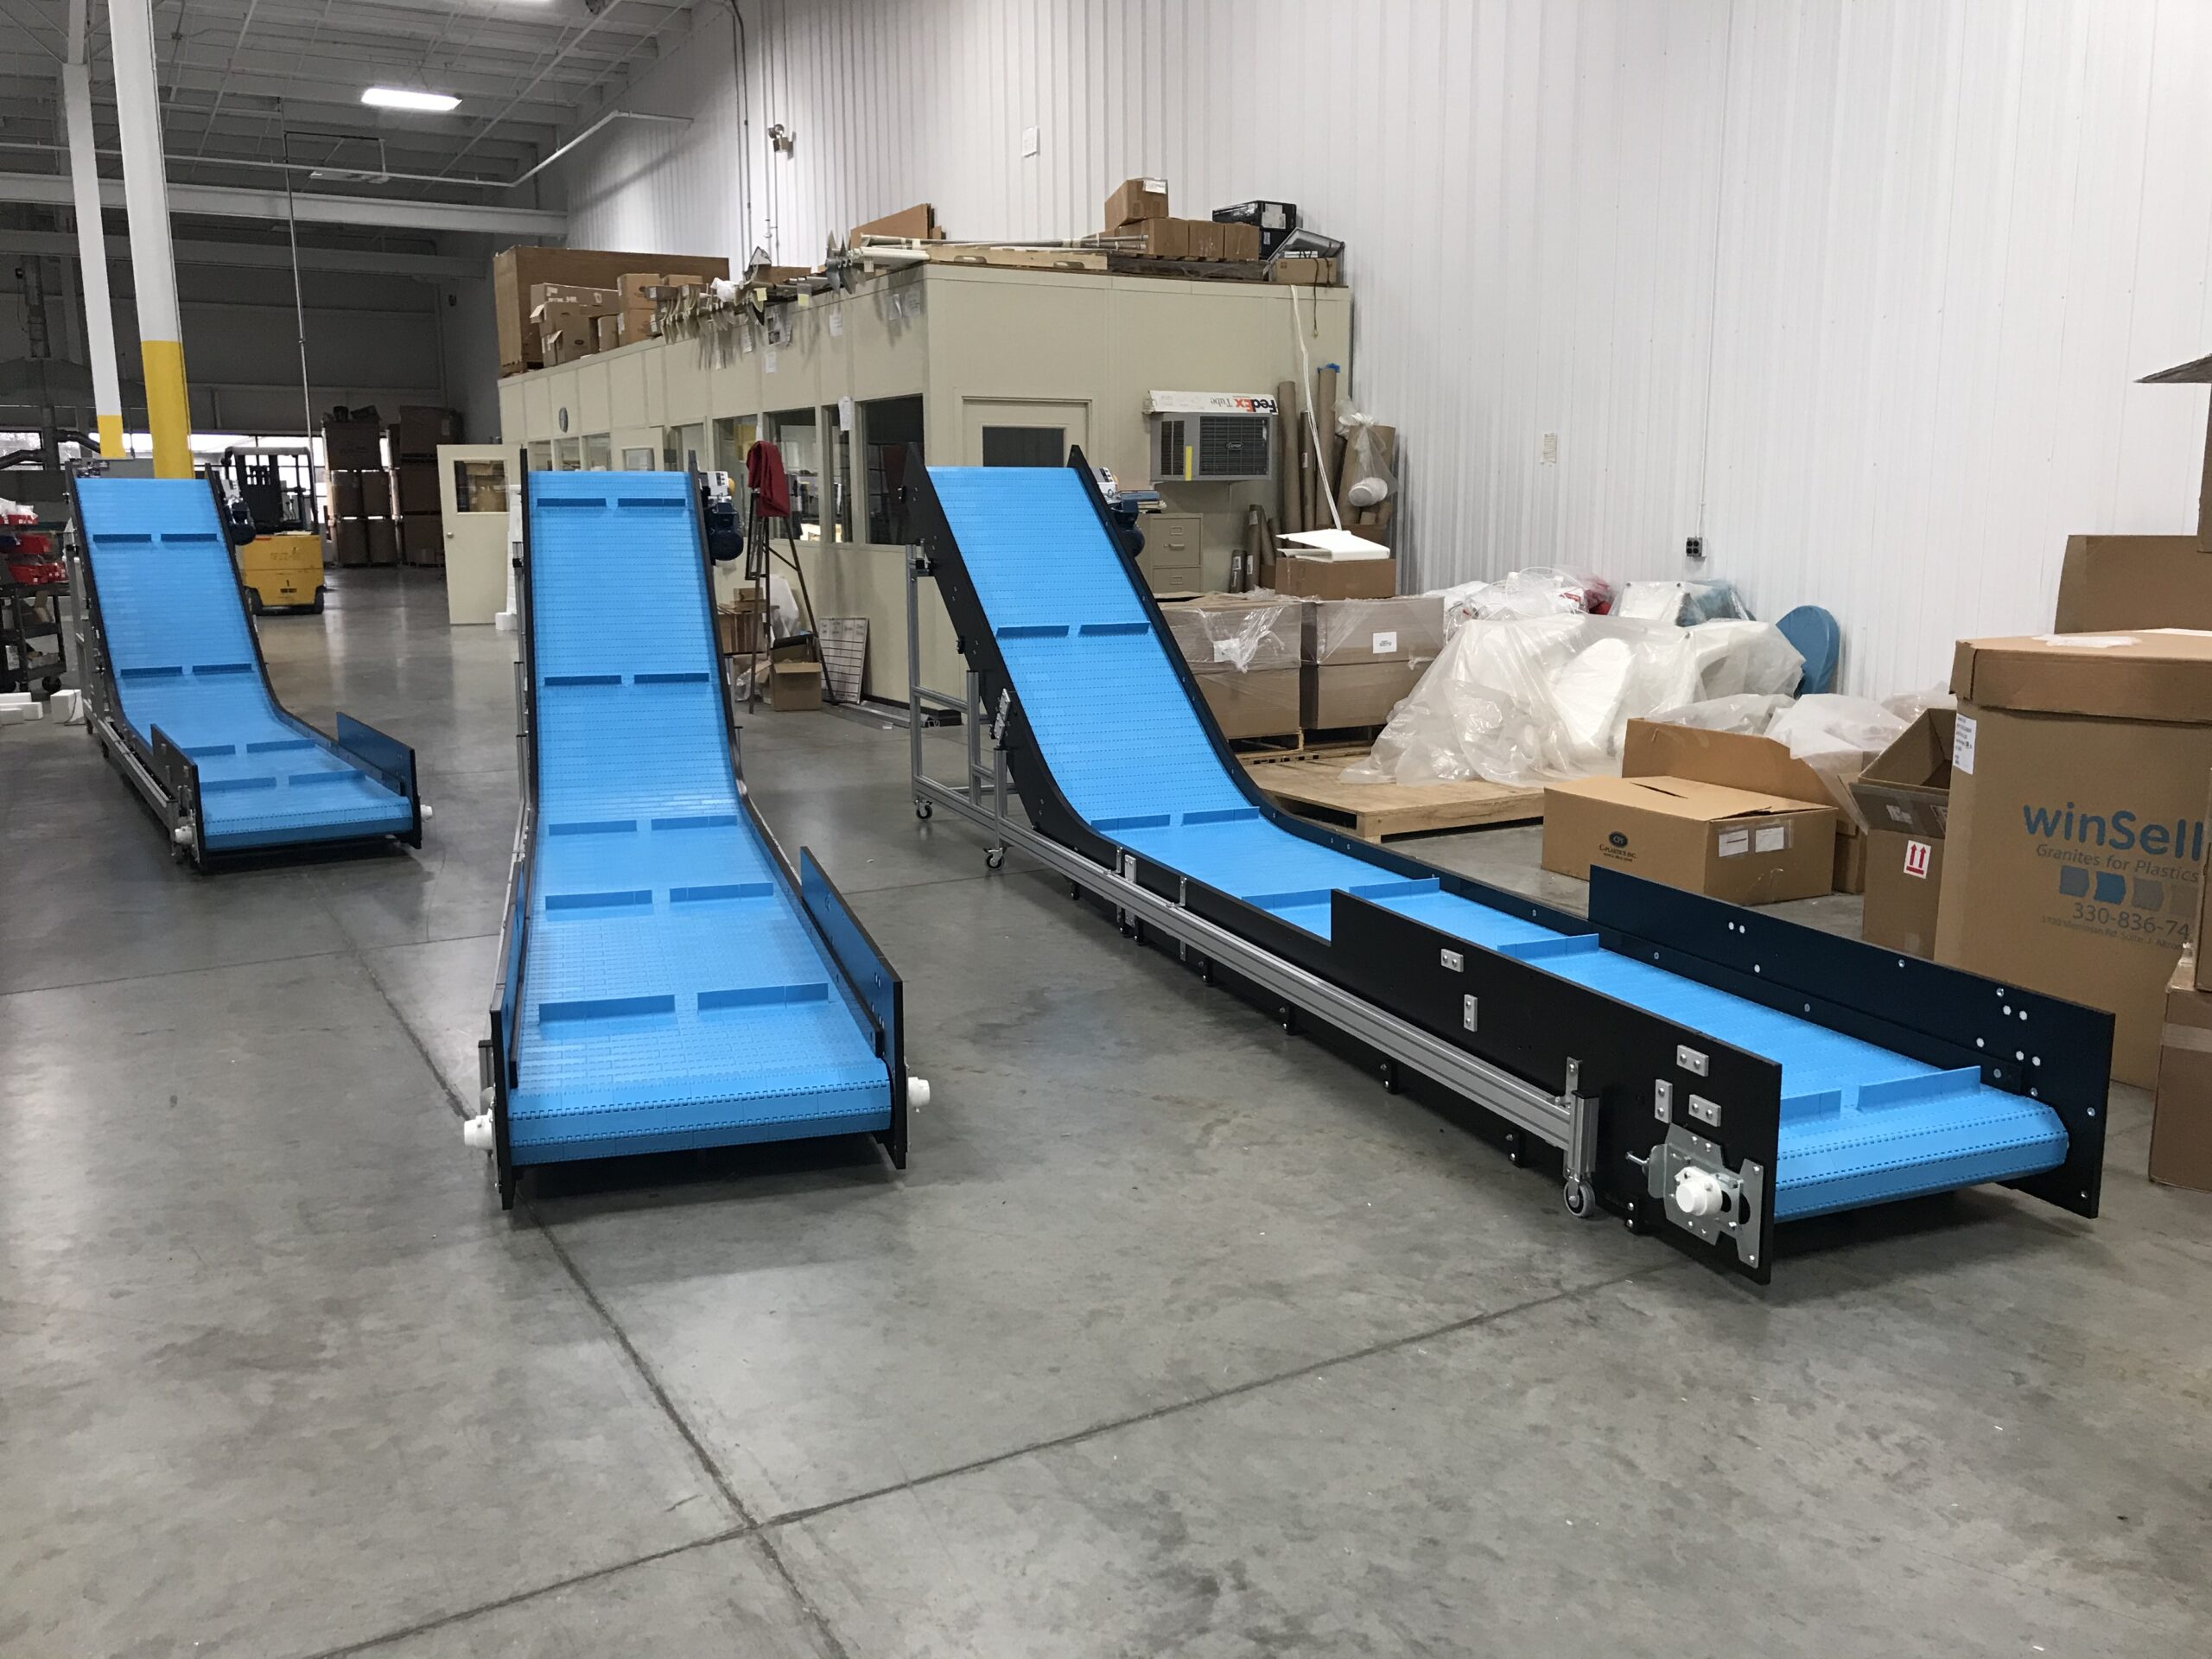 How to find the Best Conveyor for Large Heavy Plastic Parts